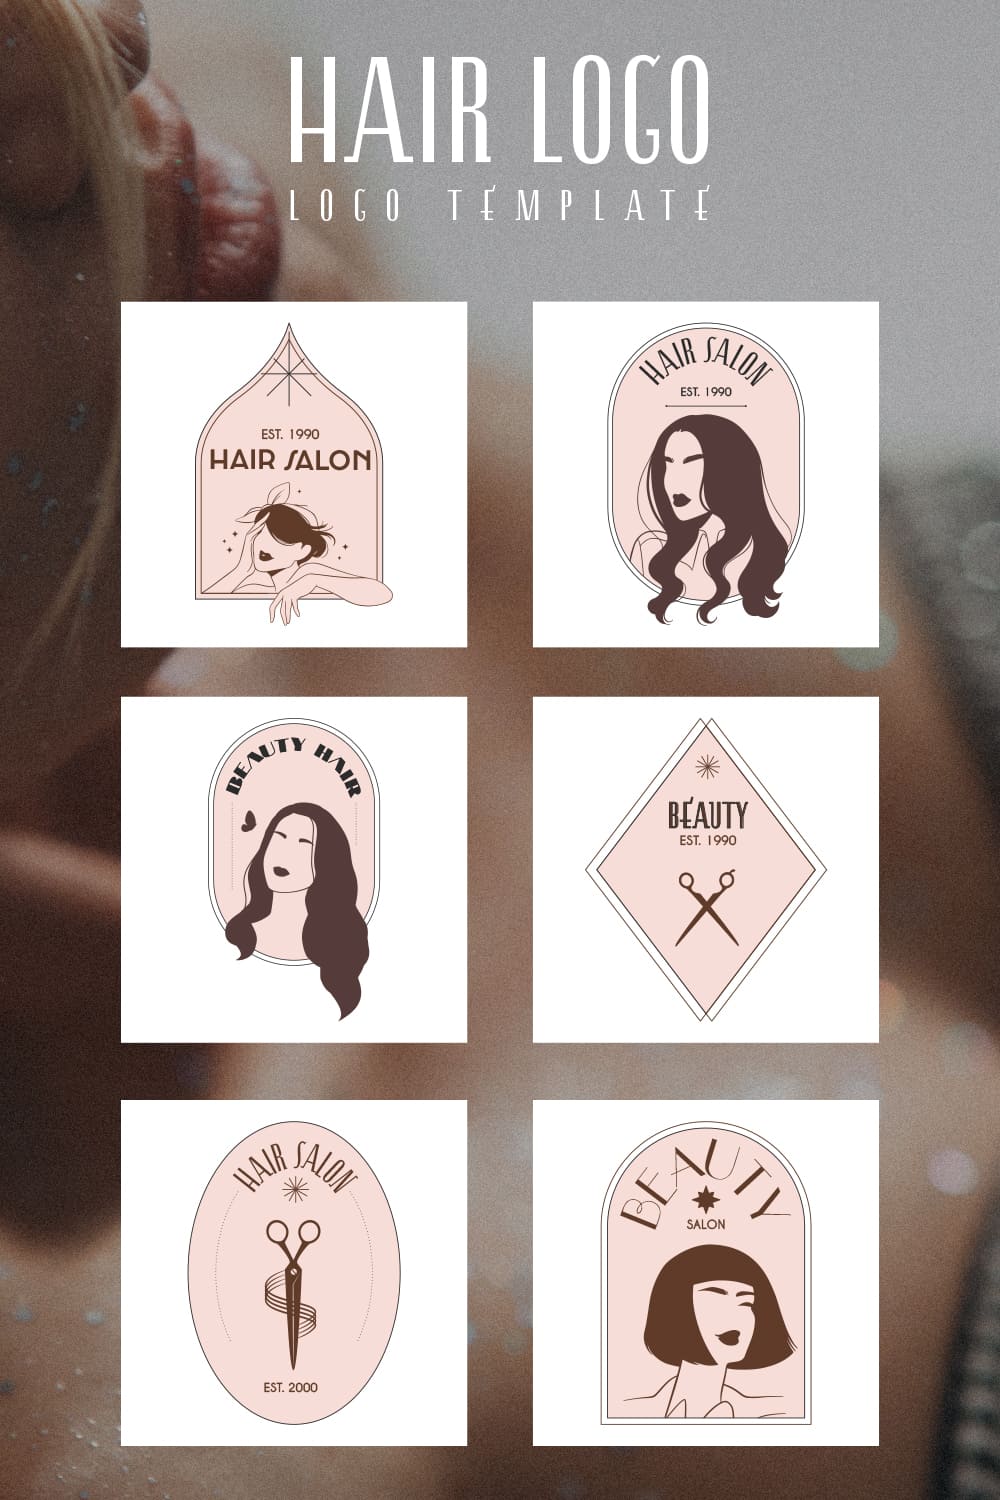 Pastel logos for hair industry.